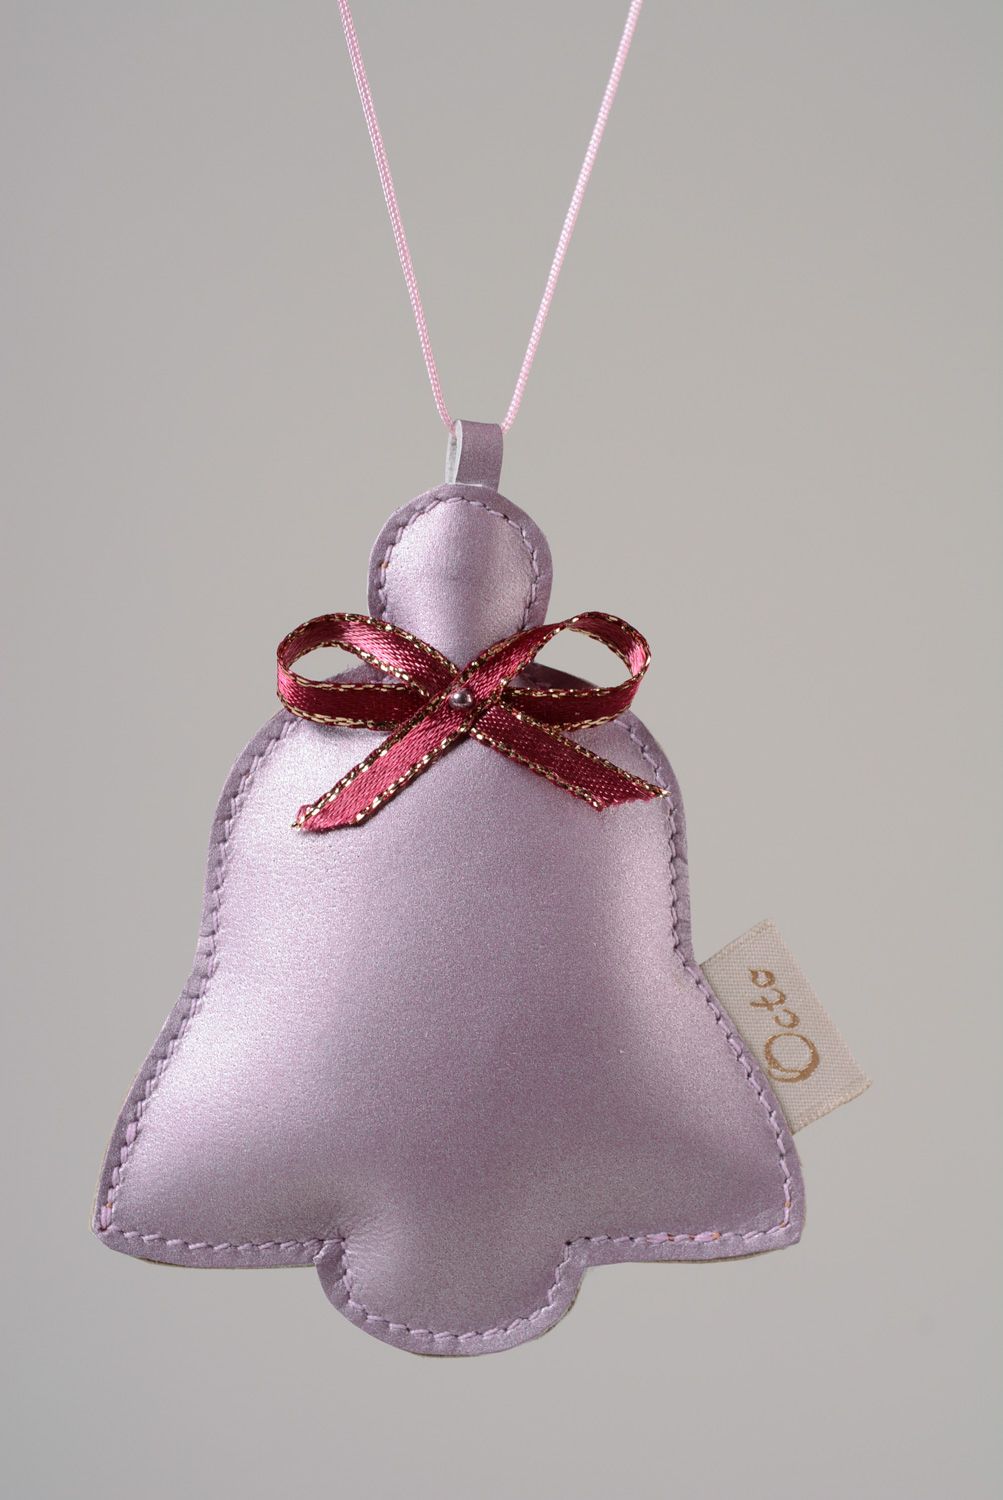 Homemade two-colored leather bag charm or keychain Bell photo 1